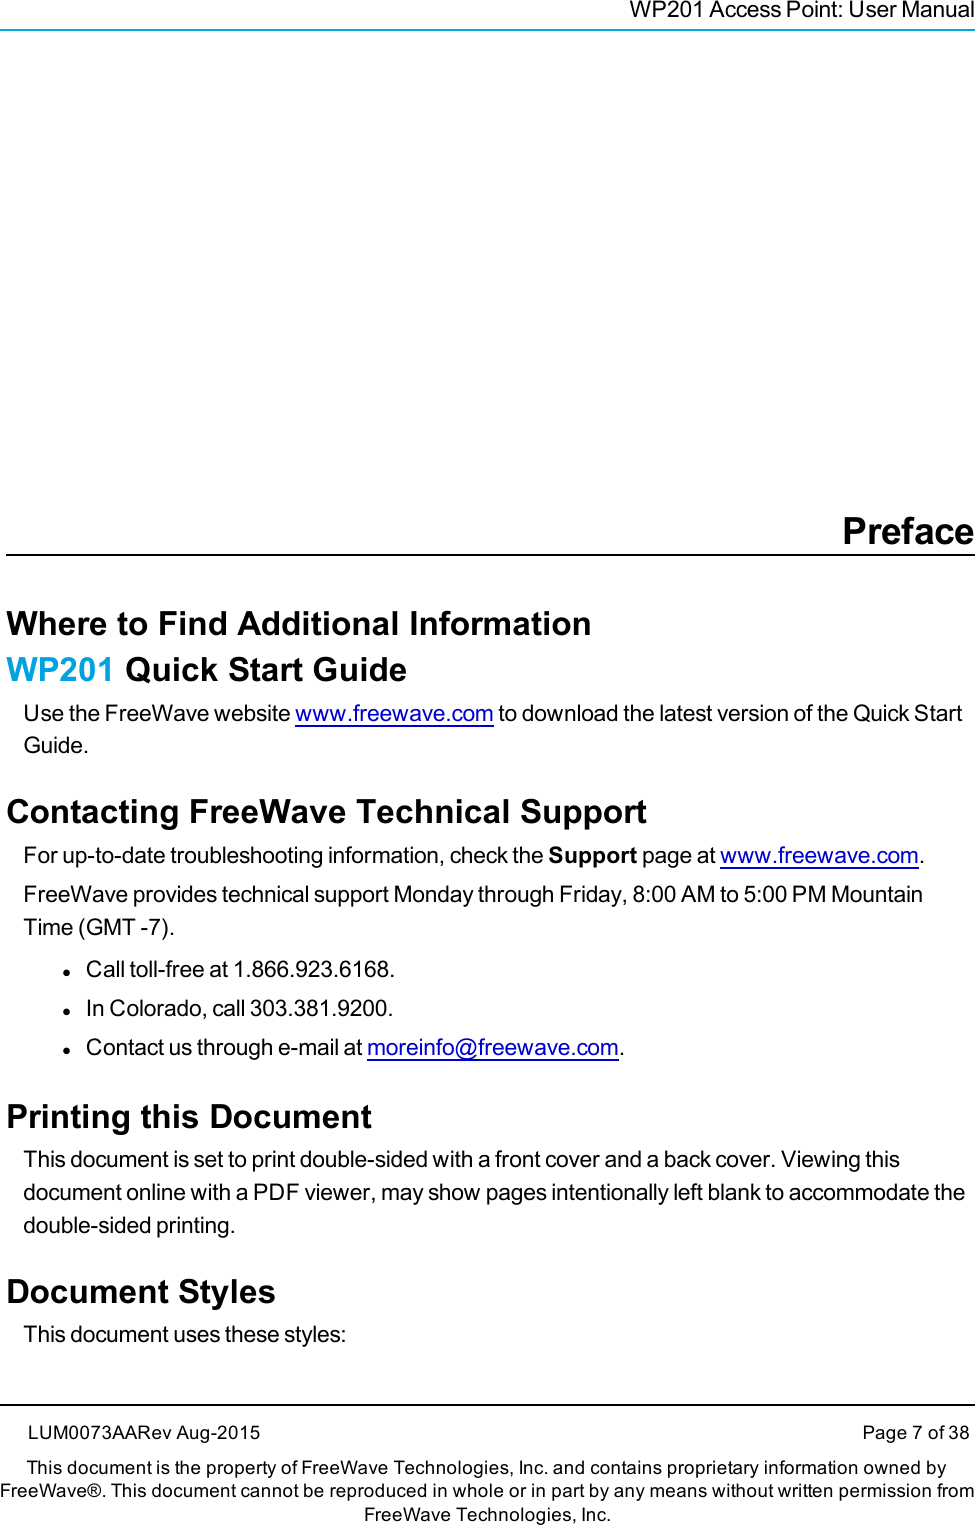 WP201 Access Point: User ManualPrefaceWhere to Find Additional InformationWP201 Quick Start GuideUse the FreeWave website www.freewave.com to download the latest version of the Quick StartGuide.Contacting FreeWave Technical SupportFor up-to-date troubleshooting information, check the Support page at www.freewave.com.FreeWave provides technical support Monday through Friday, 8:00 AM to 5:00 PM MountainTime (GMT -7).lCall toll-free at 1.866.923.6168.lIn Colorado, call 303.381.9200.lContact us through e-mail at moreinfo@freewave.com.Printing this DocumentThis document is set to print double-sided with a front cover and a back cover. Viewing thisdocument online with a PDF viewer, may show pages intentionally left blank to accommodate thedouble-sided printing.Document StylesThis document uses these styles:LUM0073AARev Aug-2015 Page 7 of 38This document is the property of FreeWave Technologies, Inc. and contains proprietary information owned byFreeWave®. This document cannot be reproduced in whole or in part by any means without written permission fromFreeWave Technologies, Inc.